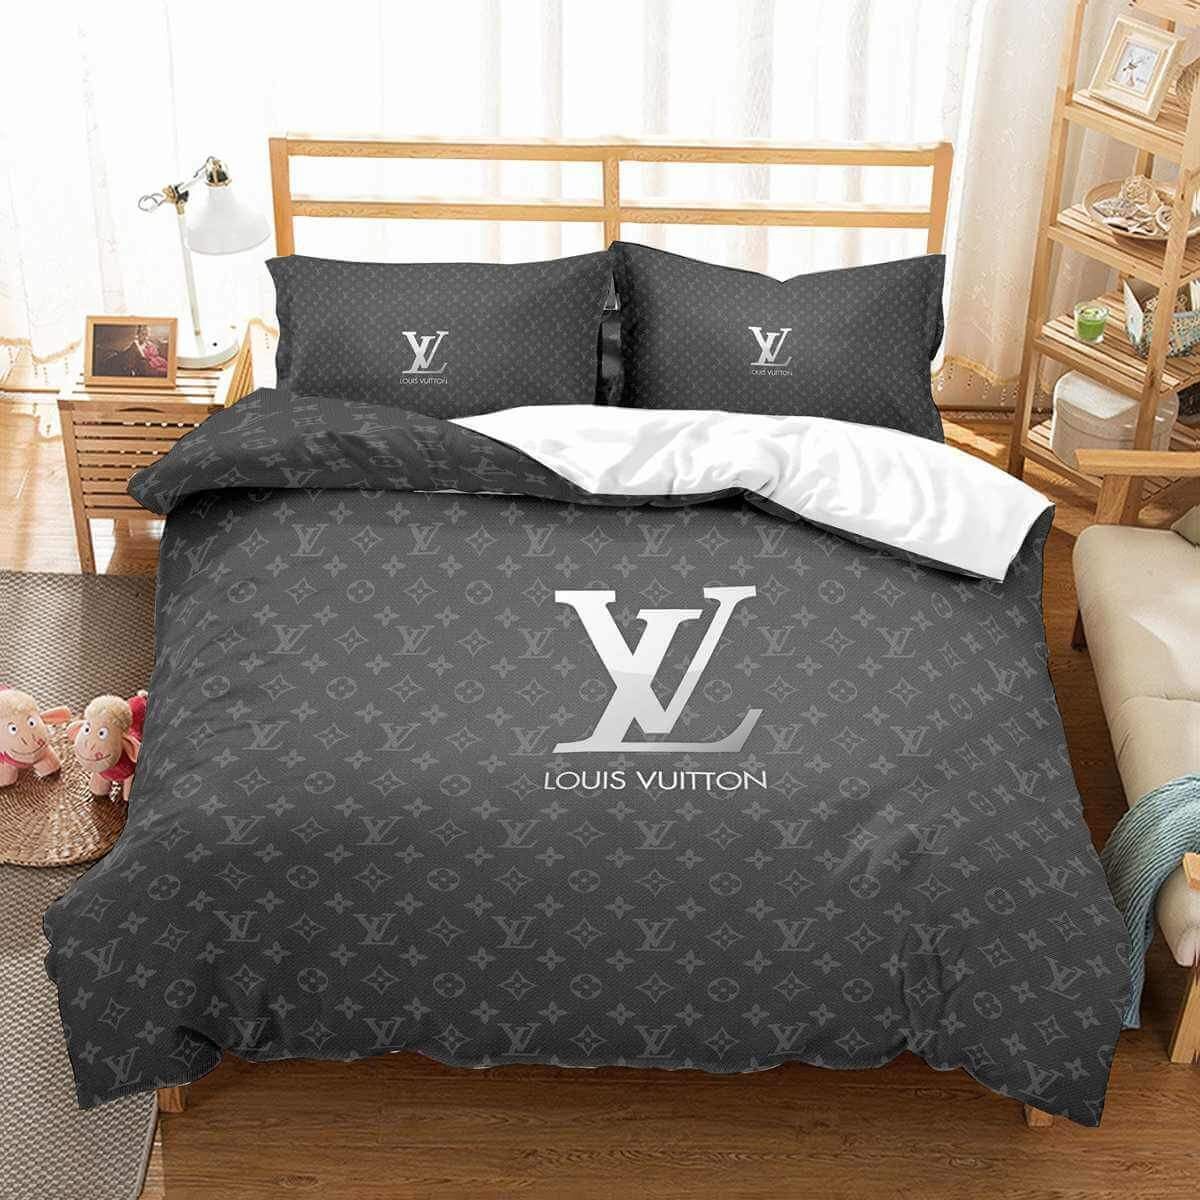 Let me show you about some luxury brand bedding set 2022 158